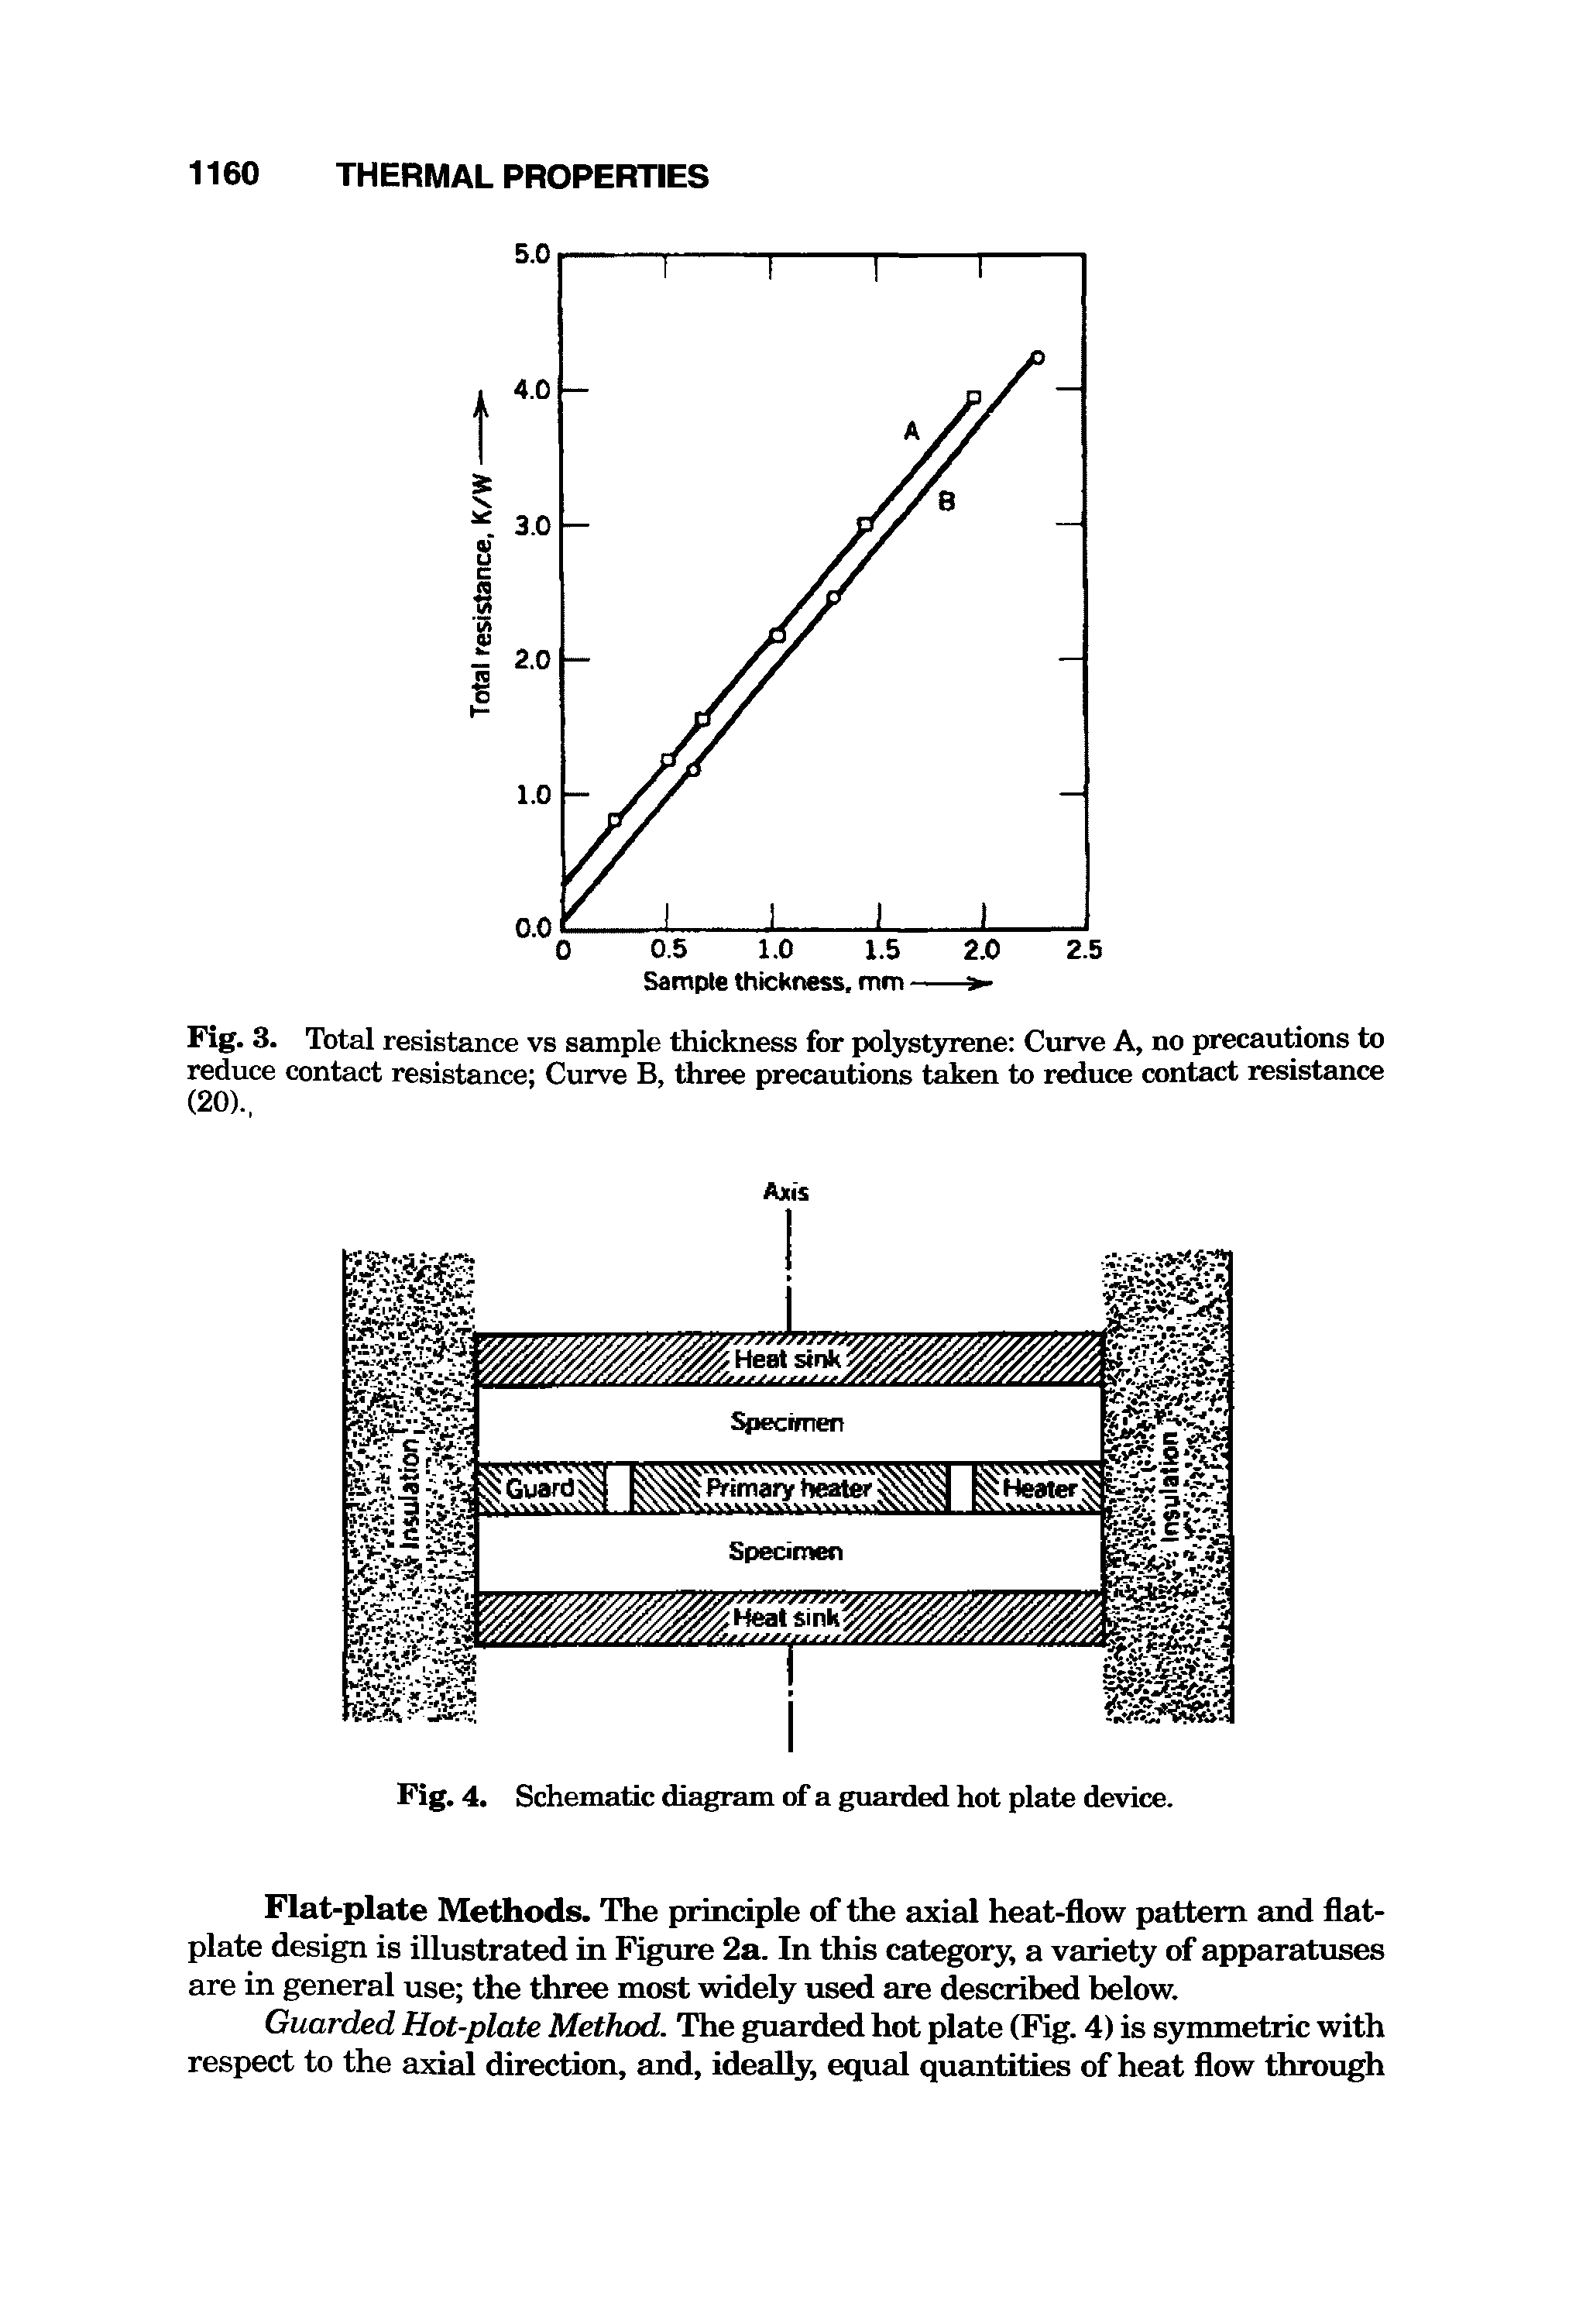 Fig. 3. Total resistance vs sample thickness for polystyrene Curve A, no precautions to reduce contact resistance Curve B, three precautions taken to reduce contact resistance (20).,...